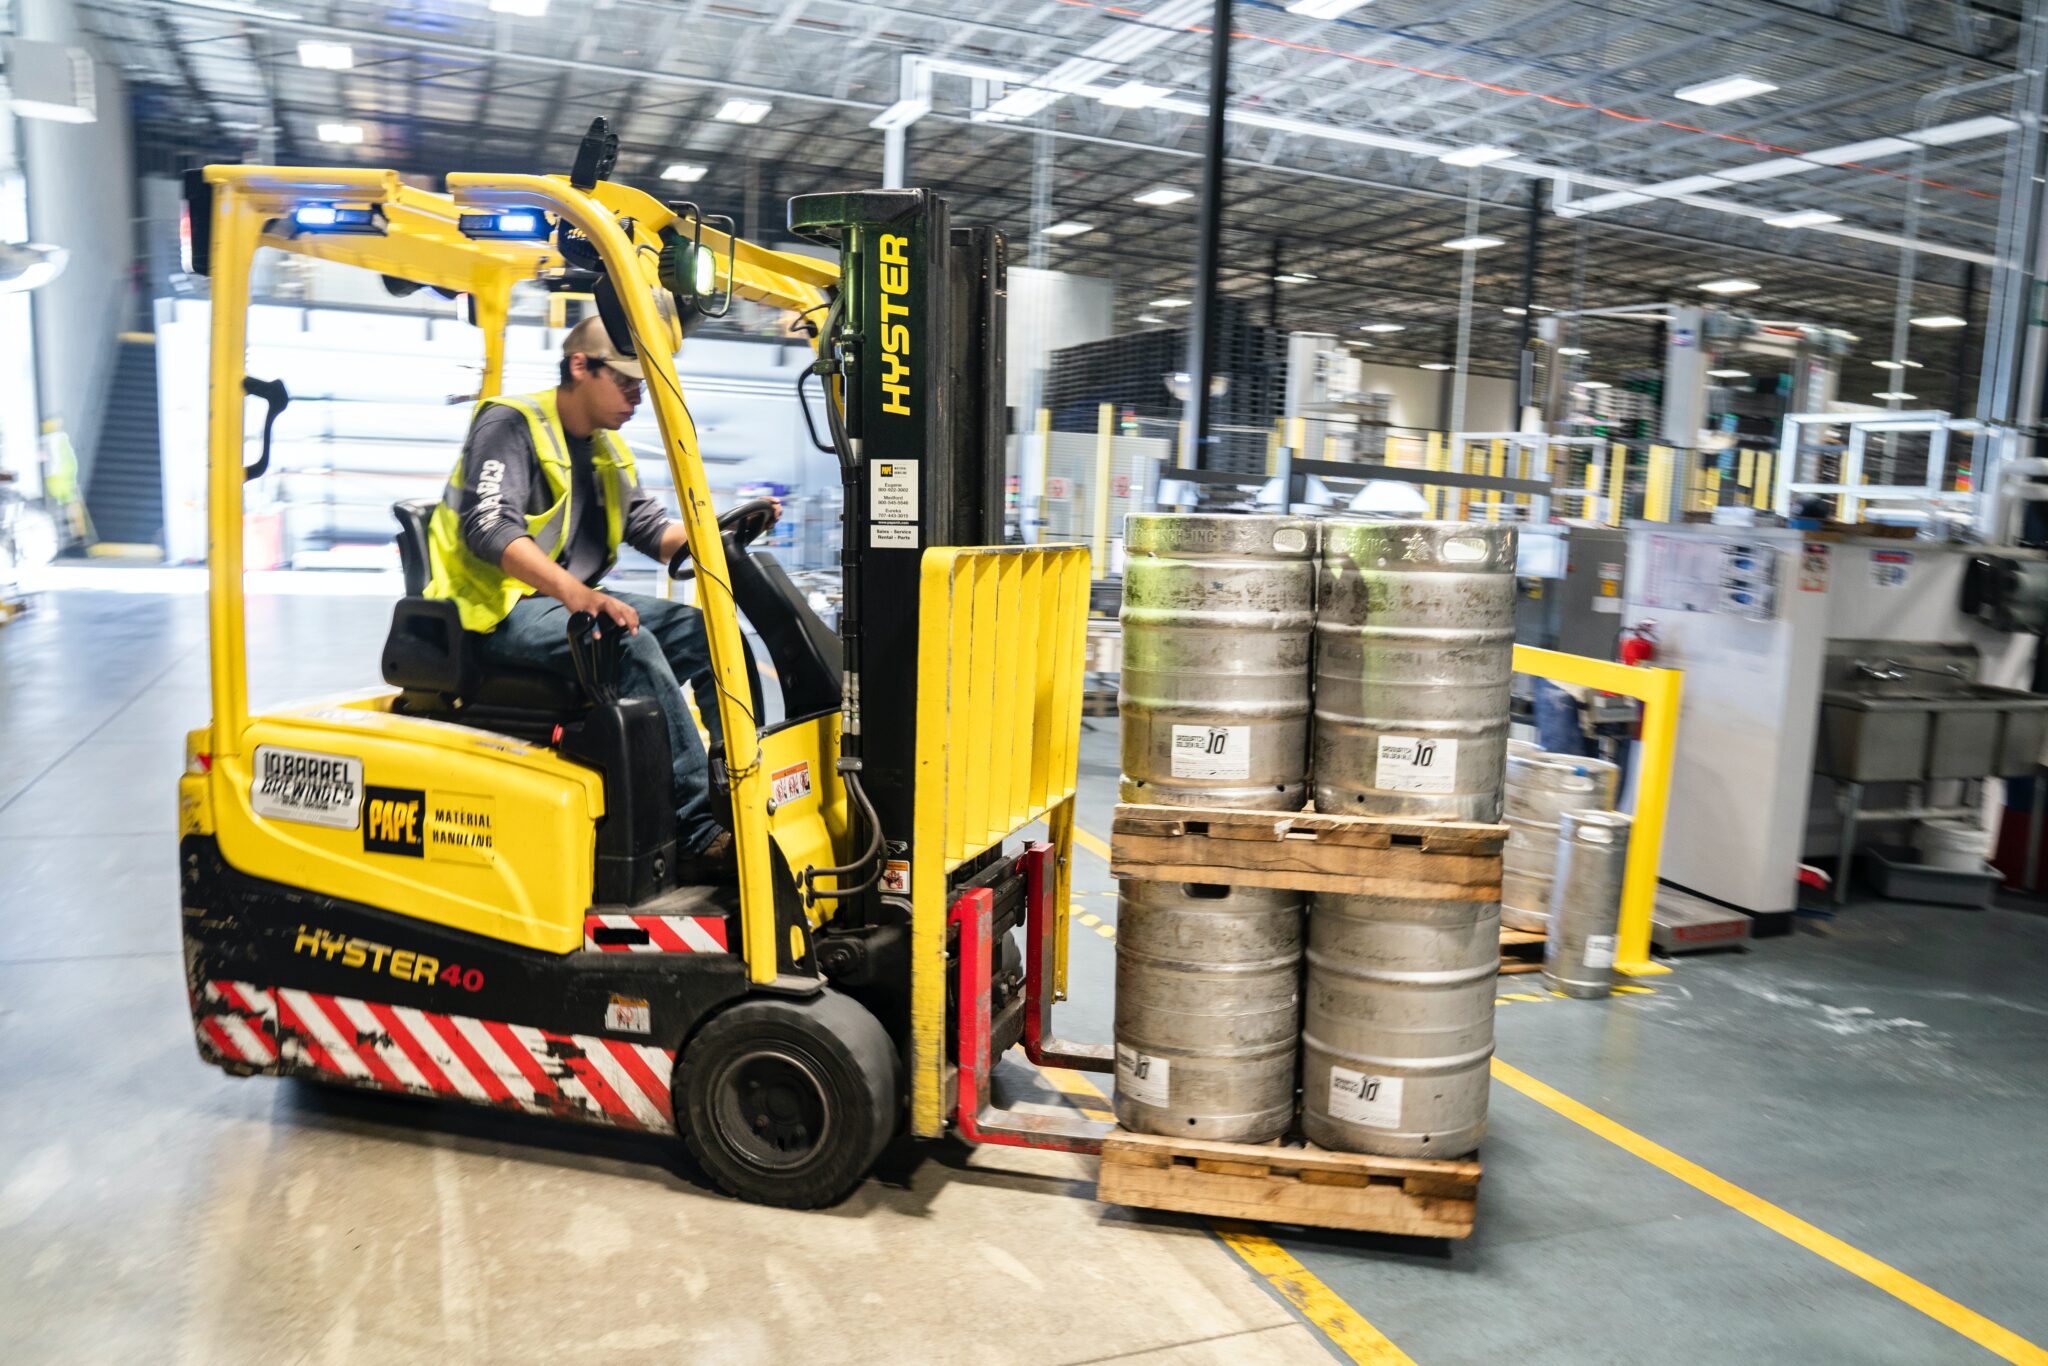 Forklift safely driven in a warehouse